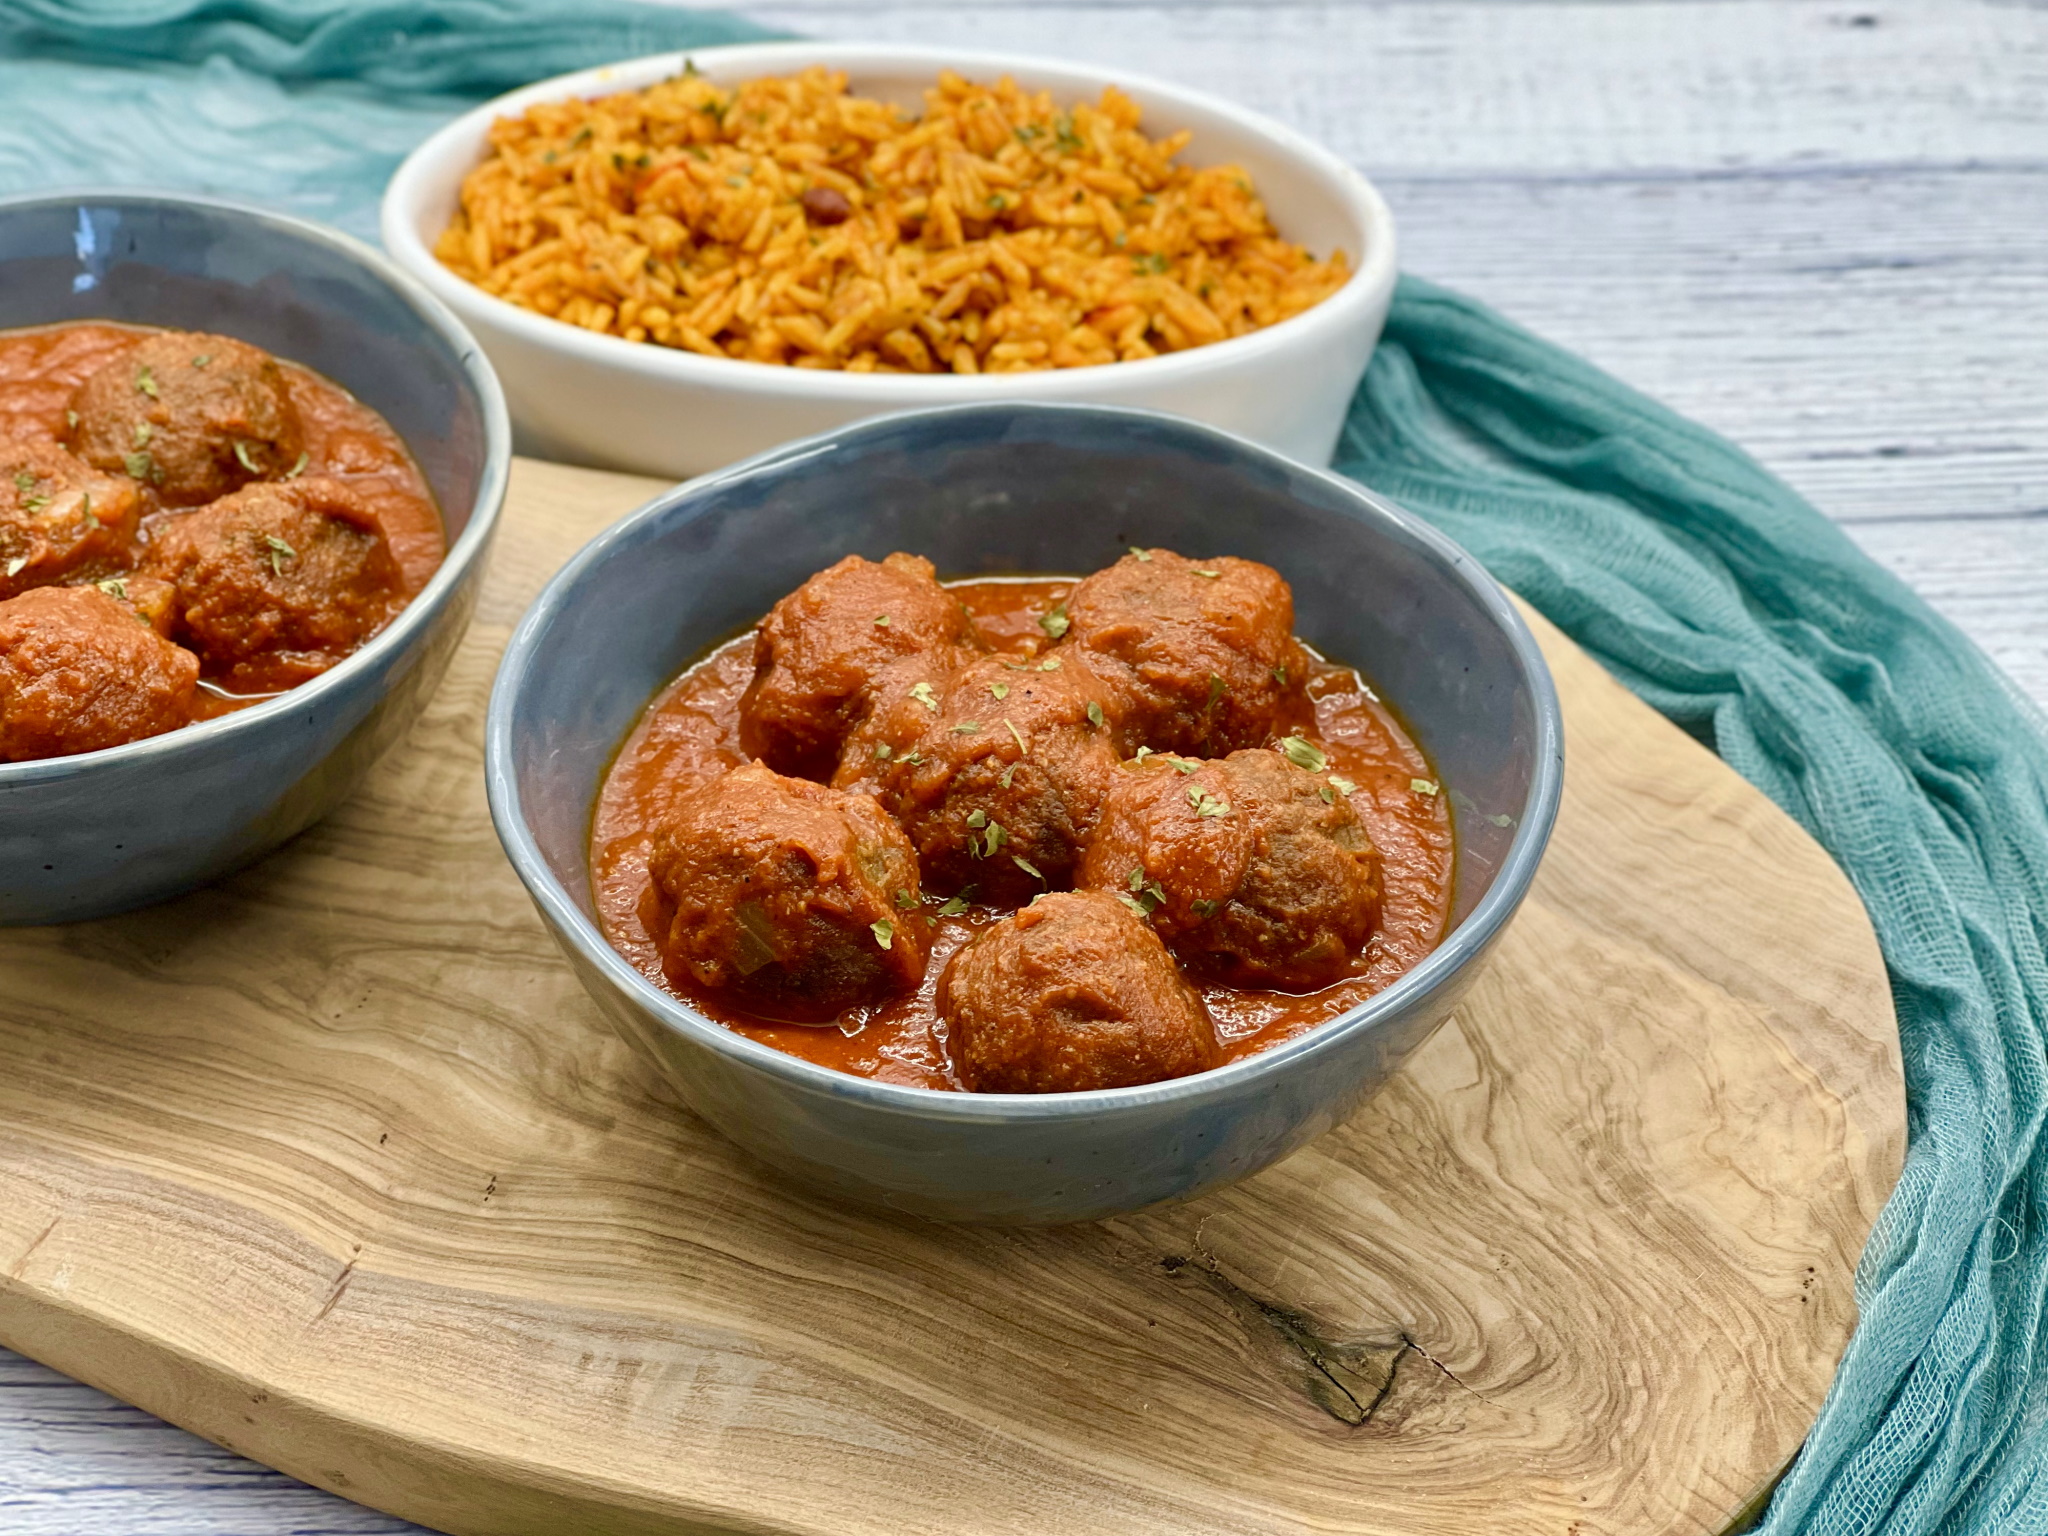 You are currently viewing Vegan Meatballs in Chipotle Sauce (Albóndigas al Chipotle)